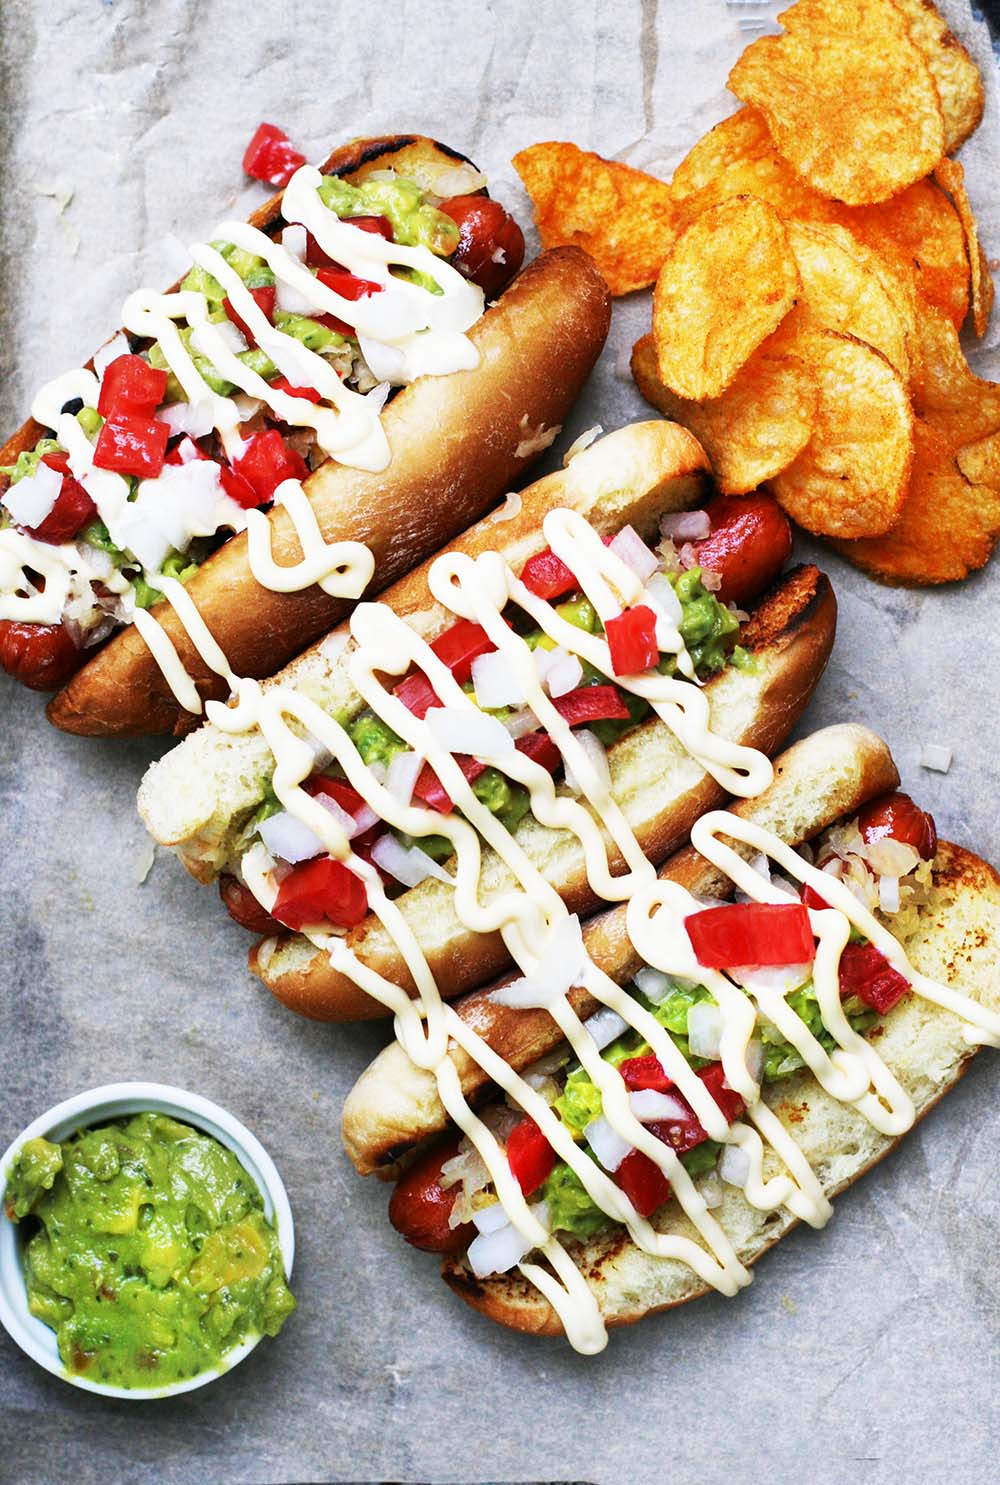 Chilean-style hot dogs: Completos are one of the most popular foods of Chile. Learn how to make them at home!